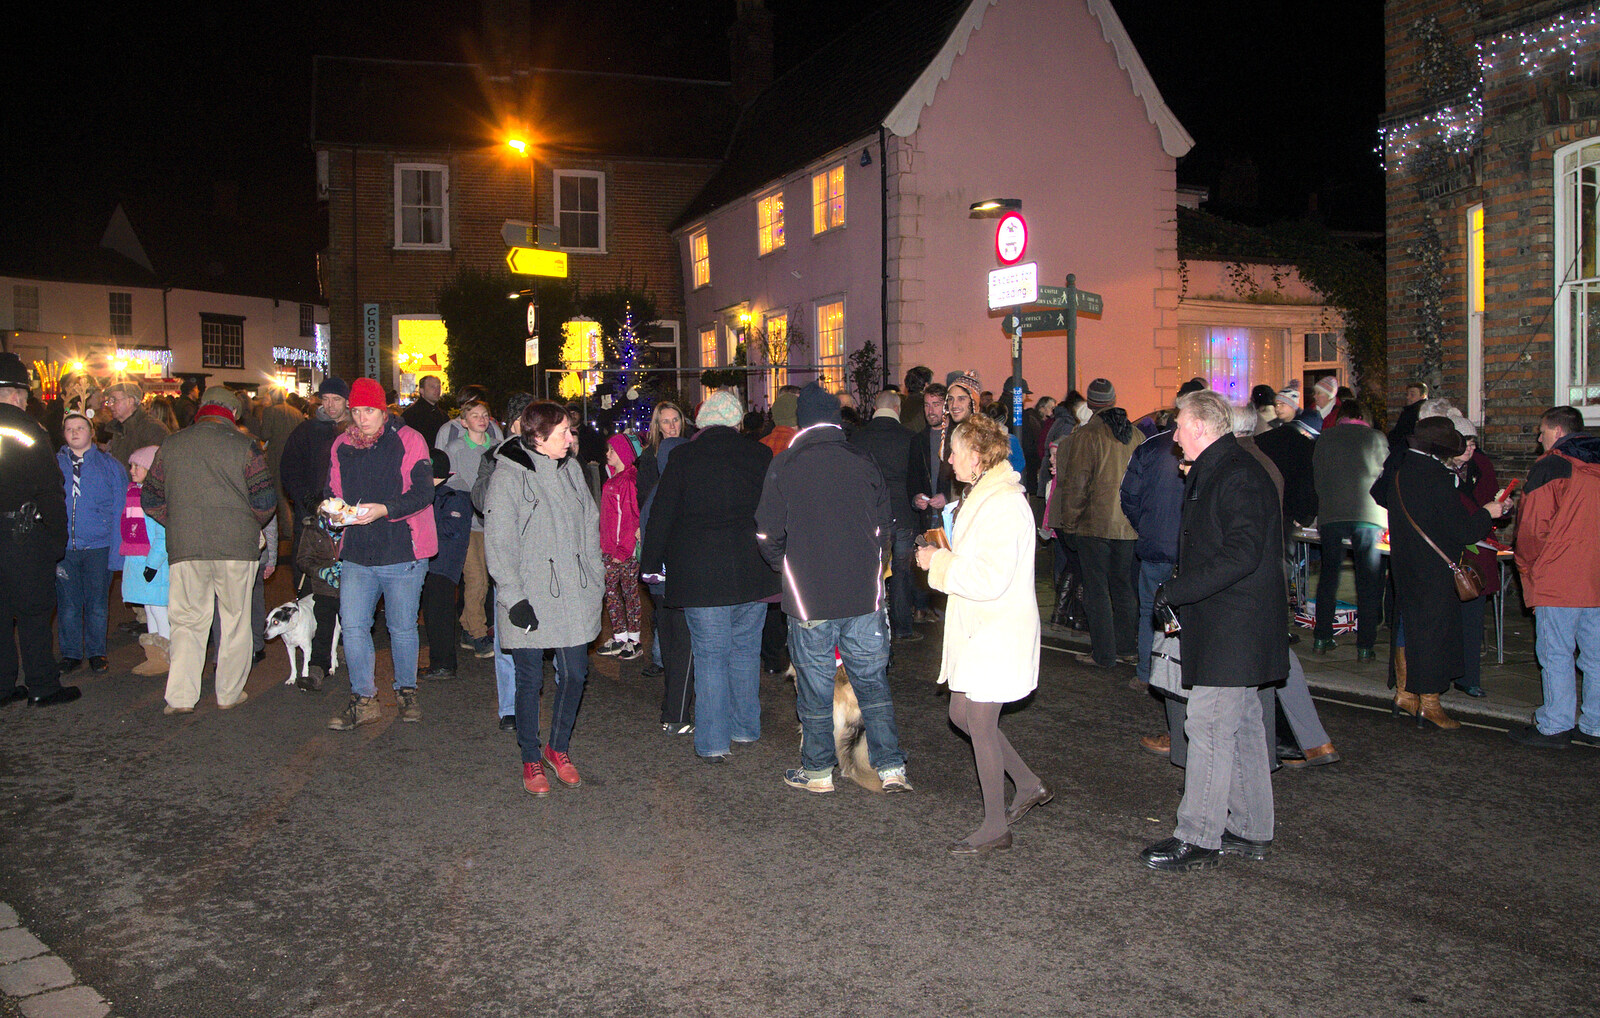 Crowds on Lambseth Street from The Eye Lights and a Thorpe Abbots Birthday, Suffolk and Norfolk - 6th December 2014